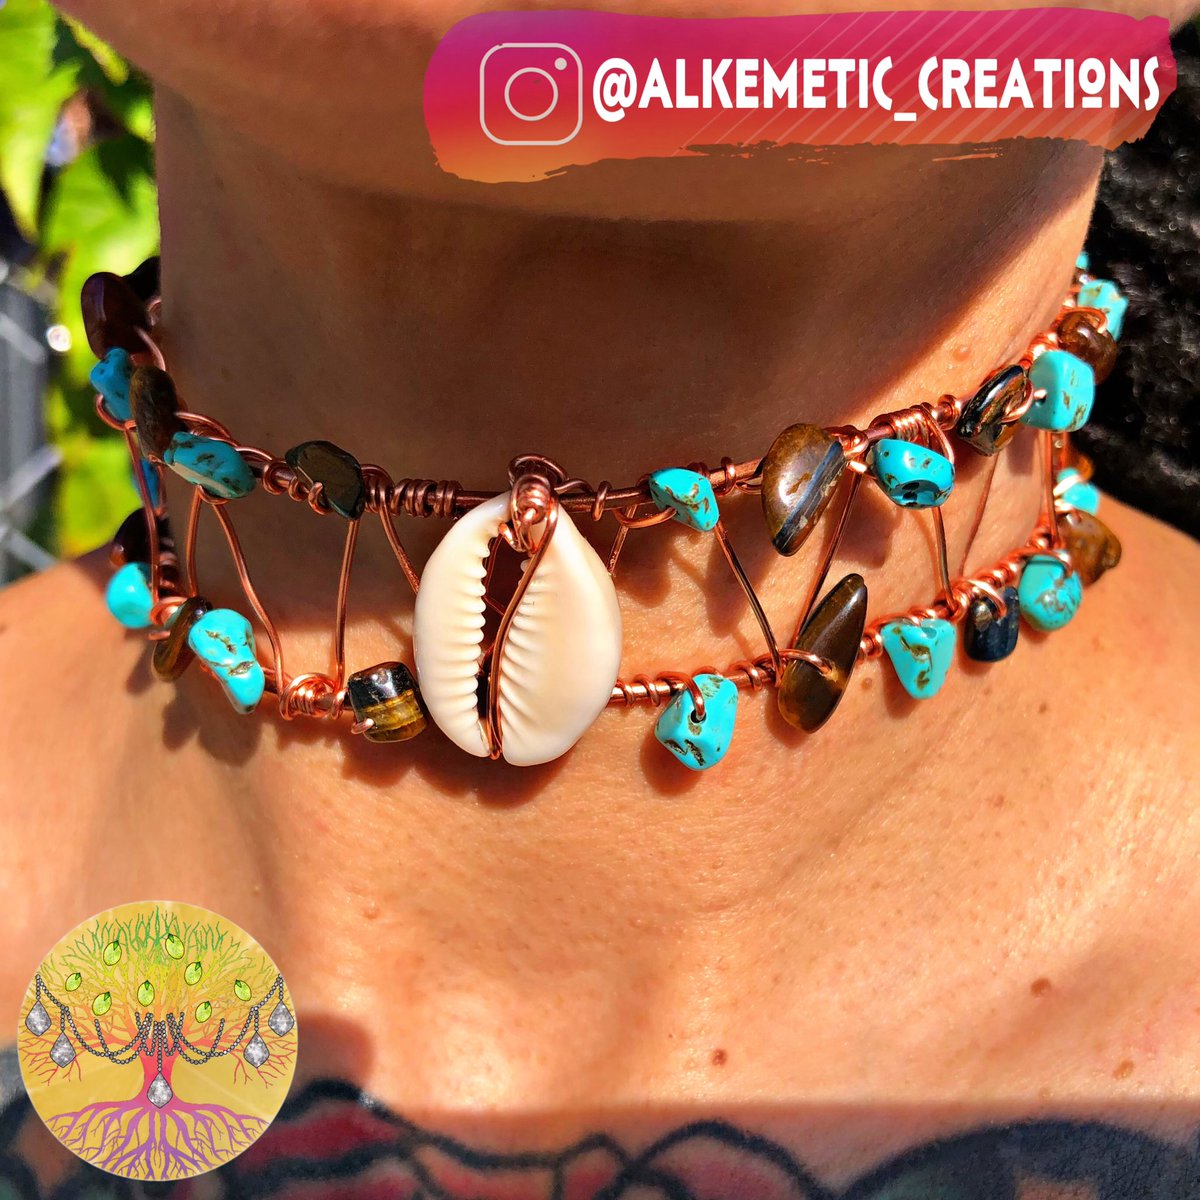 Cowrie, Wagnerite & Tiger’s Eye Copper Choker. DM to purchase.

#wagnerite #tigerseye #cowrie #choker #copperchoker #copperjewelry #crystalhealingjewelry #healingjewelry #smallbusinessowners #shopblackowned #indigenousbusinessowner #blackbusinessowner #alkemeticcreations